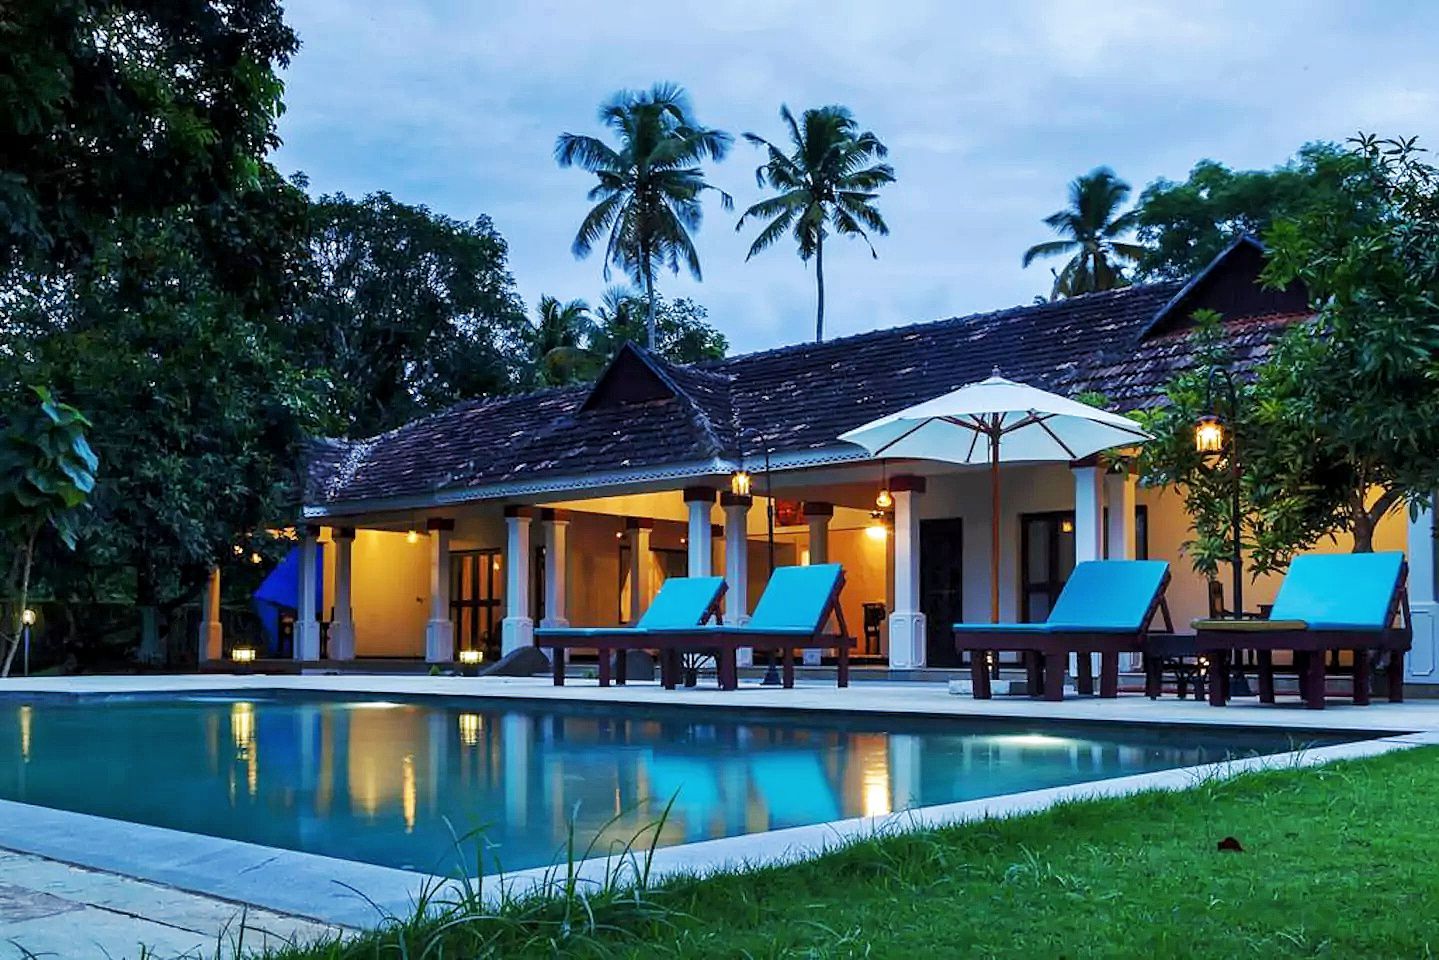 The Coolest Houses You Can Rent in India